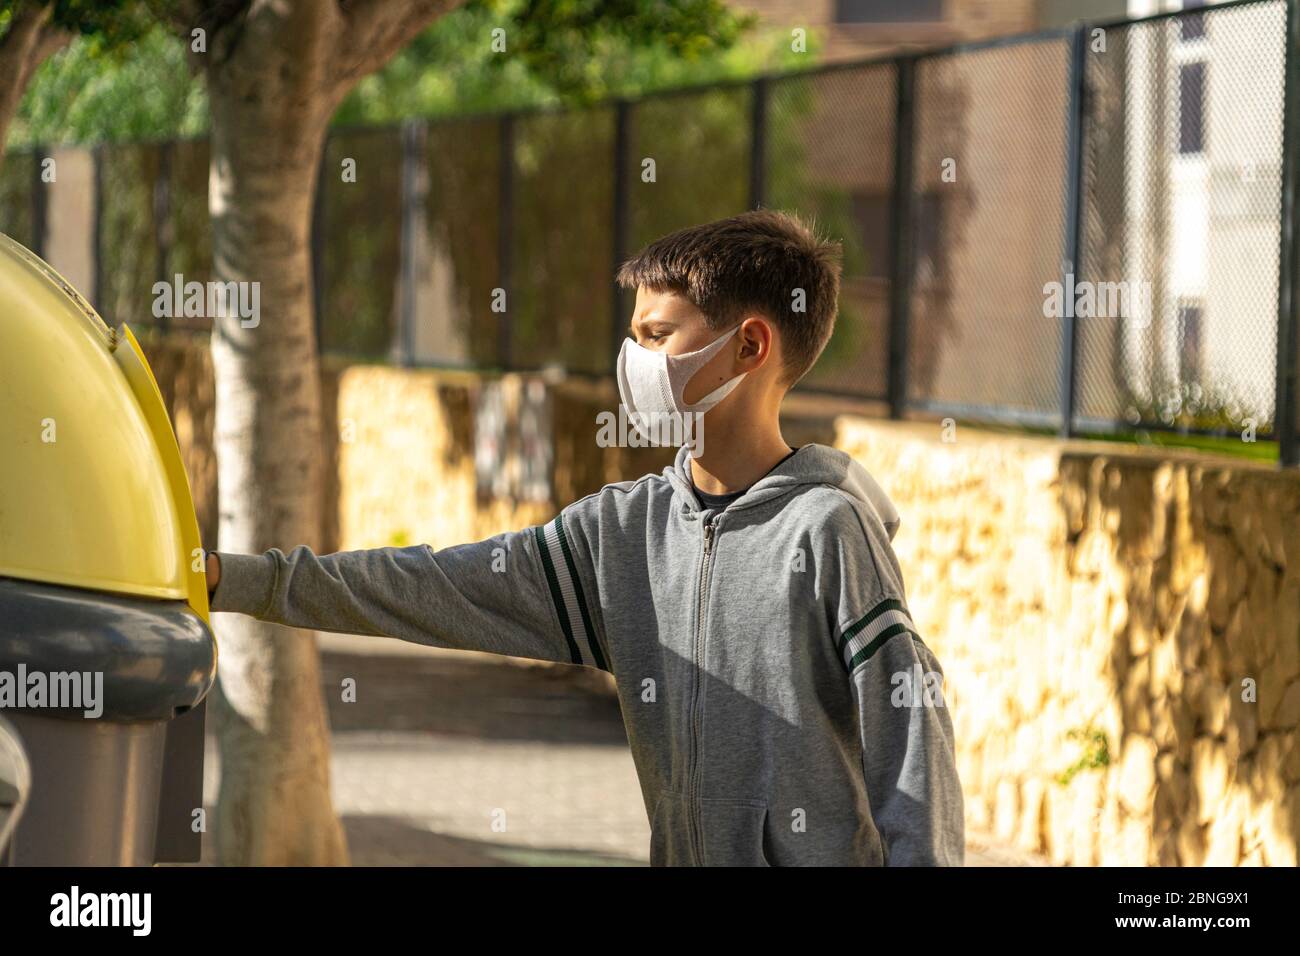 Child with protective mask and gloves throwing empty plastic bottle into recycling bin near residential apartment building outdoors Stock Photo